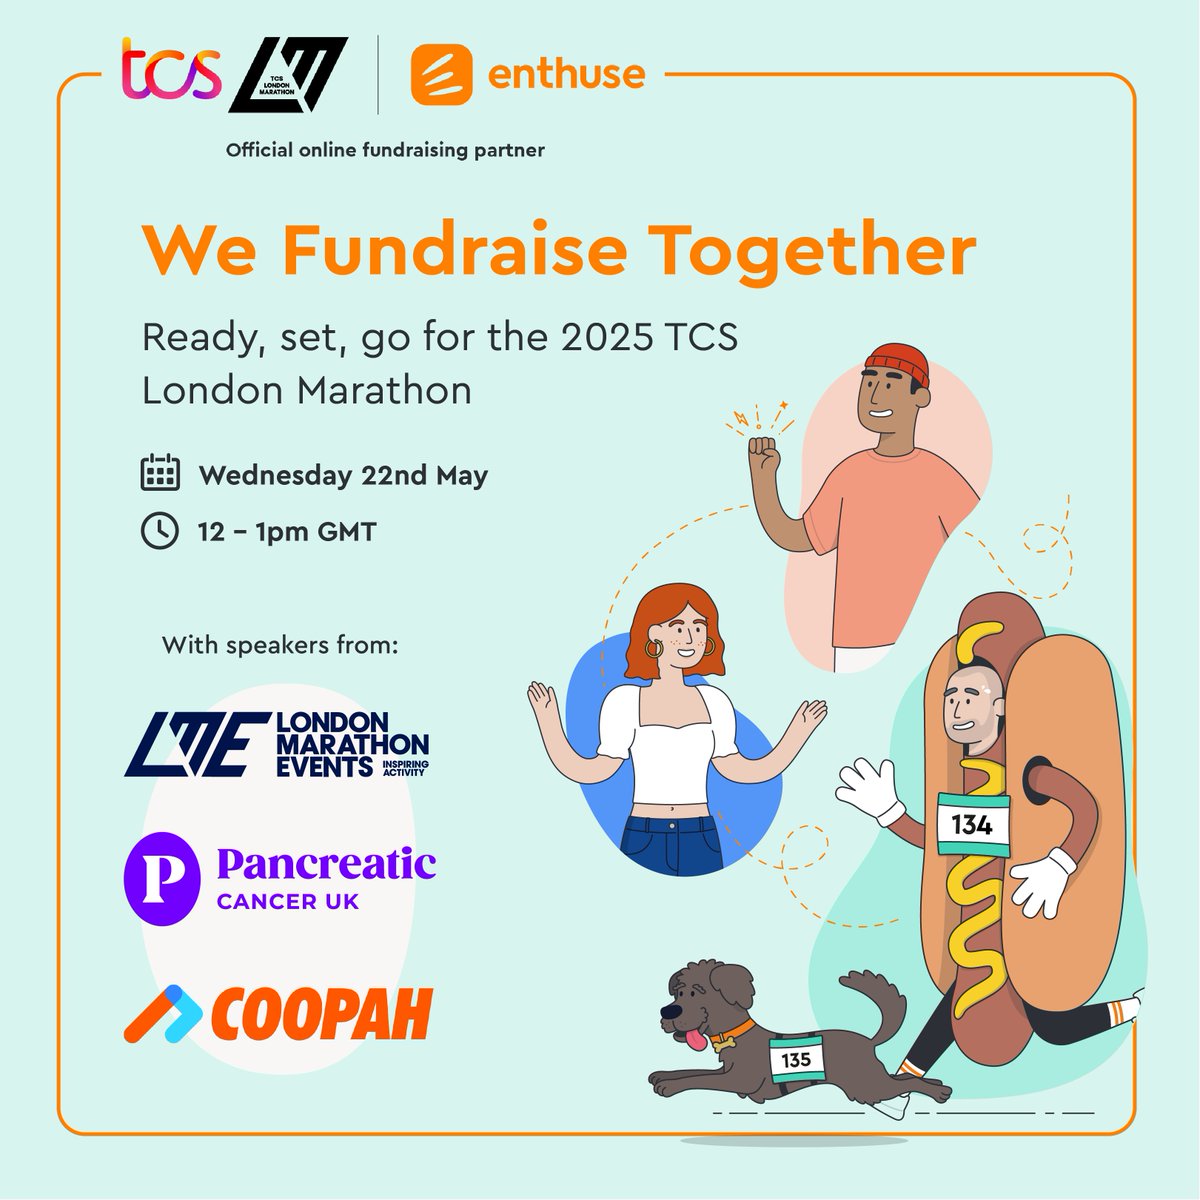 🚨 Reminder 🚨 Tomorrow lunchtime we're covering all things 2025 TCS London Marathon. With guest speakers from: - @LondonMarathon Events - @PancreaticCanUK - @Coopahruncoach Sign up here: tinyurl.com/4jzunnu5